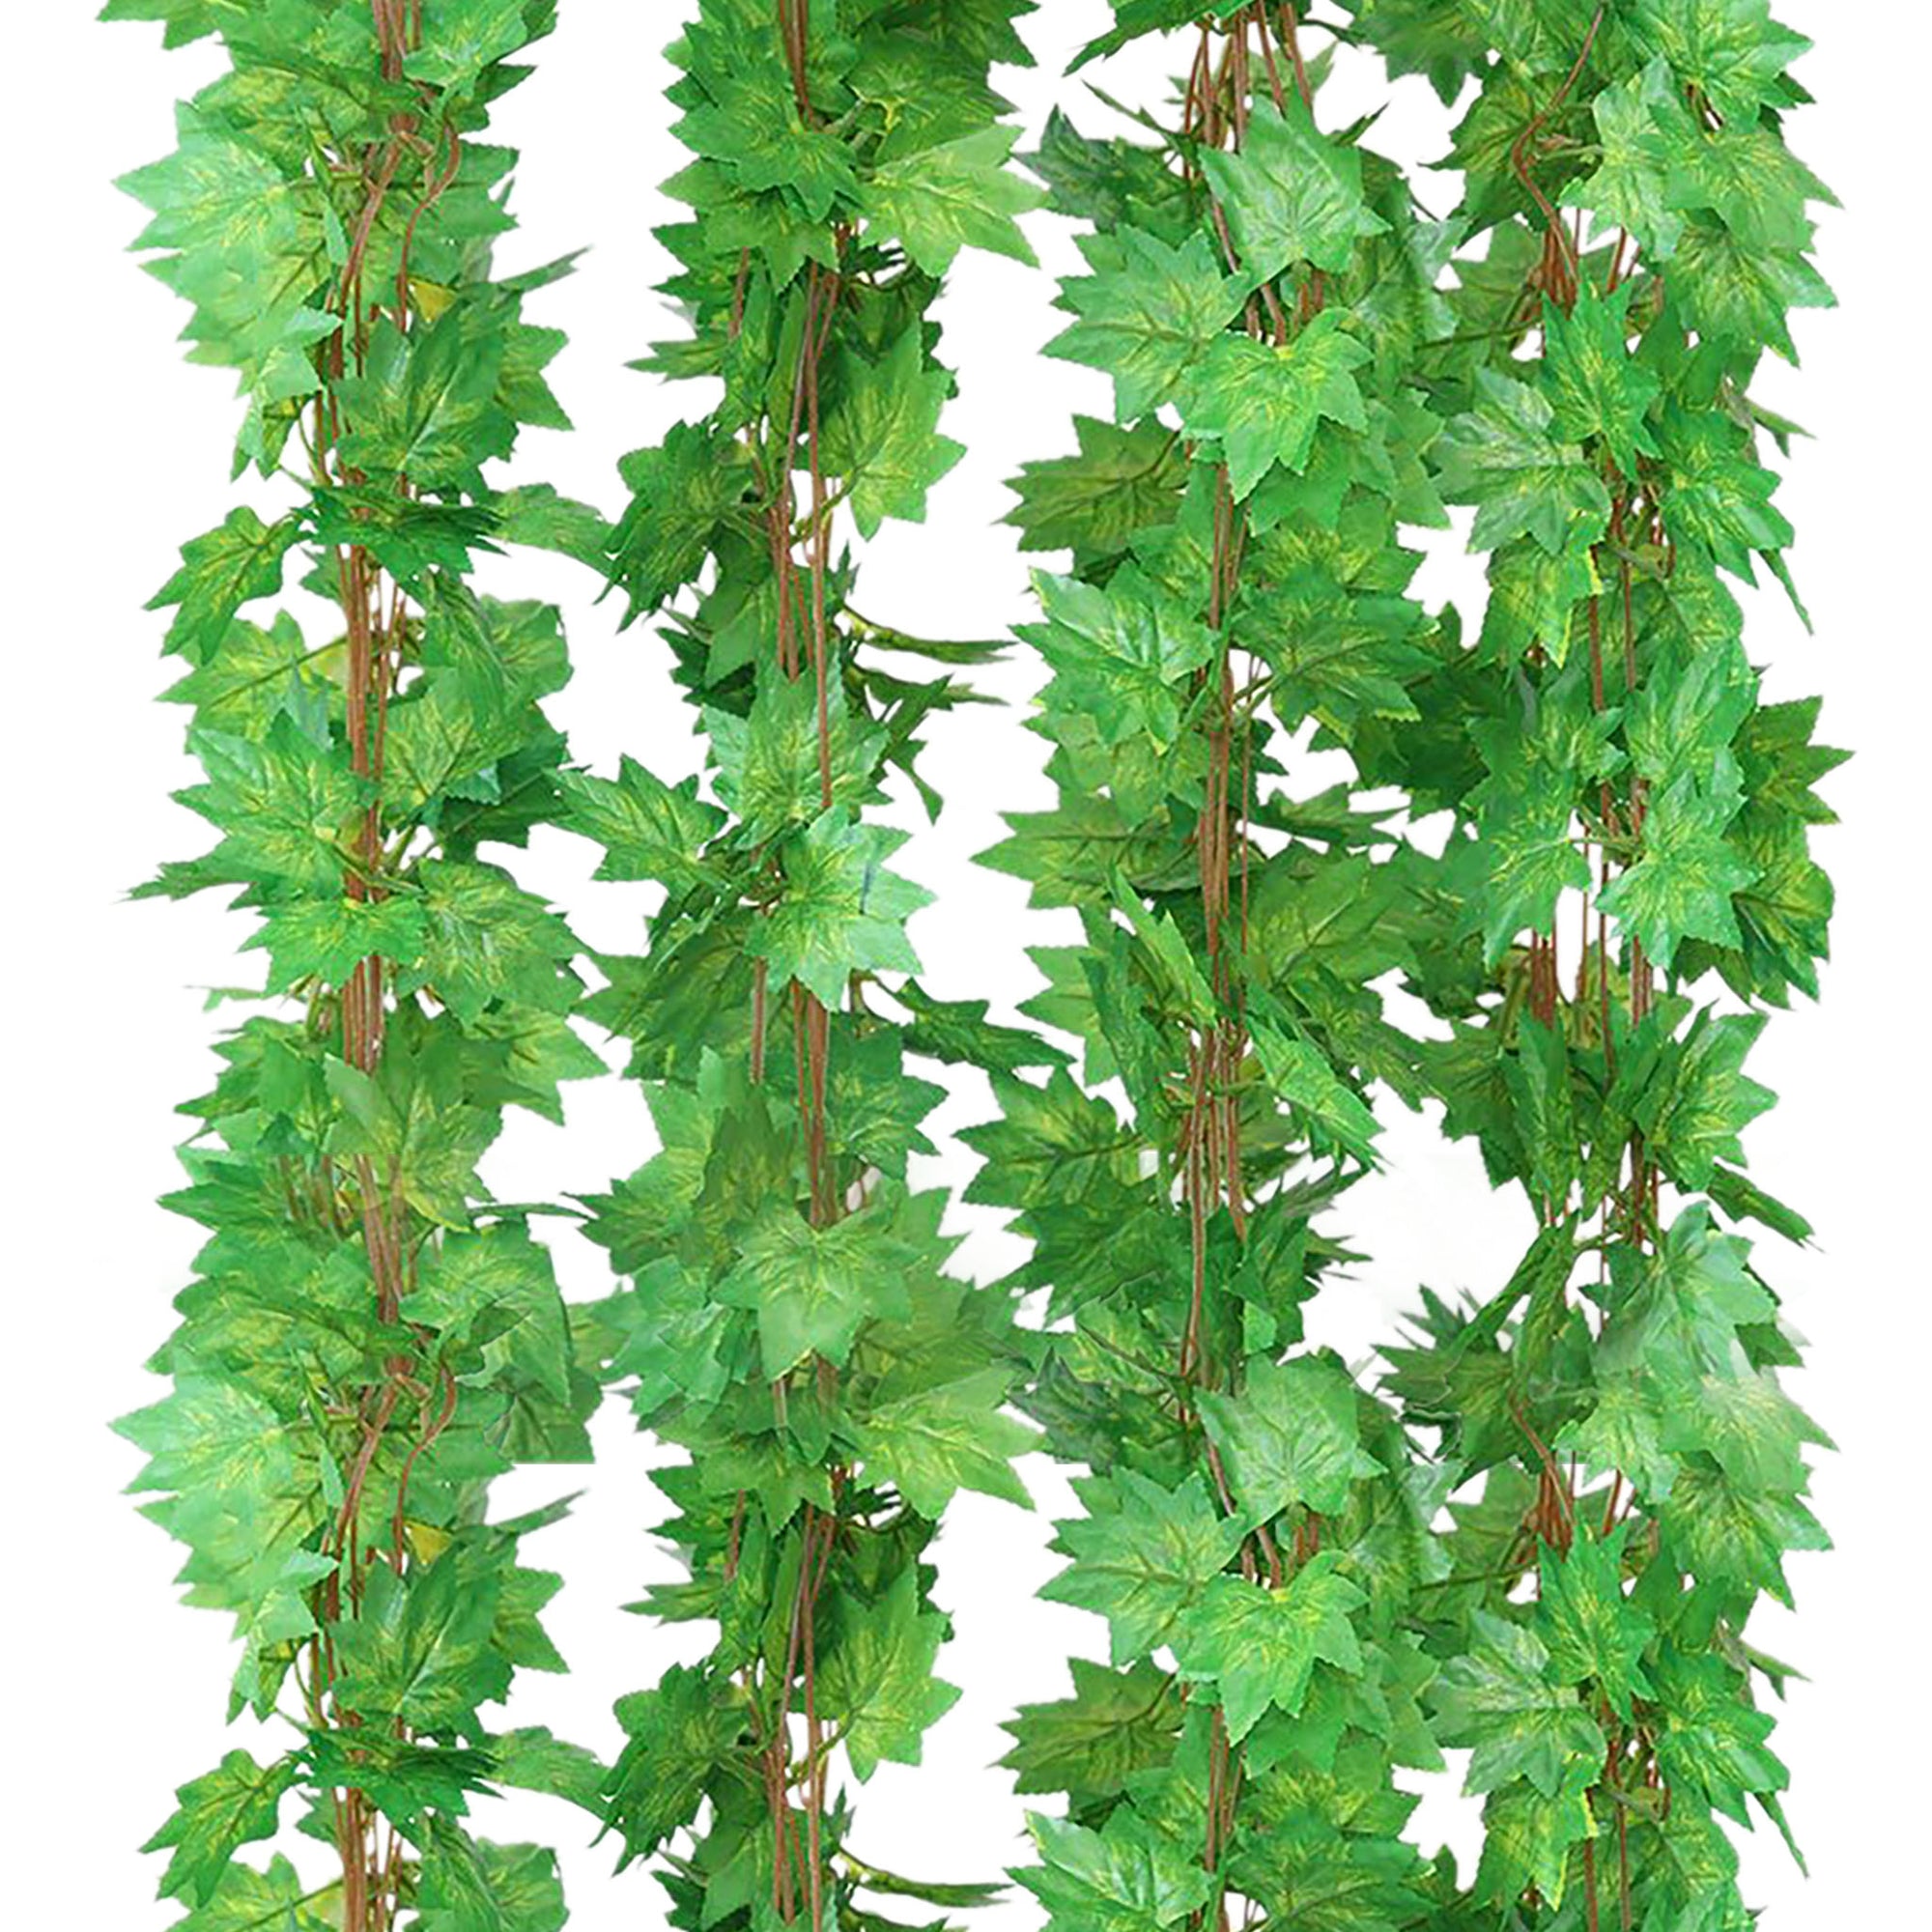 Artificial Green Maple Leaf Garland for Wall Decor